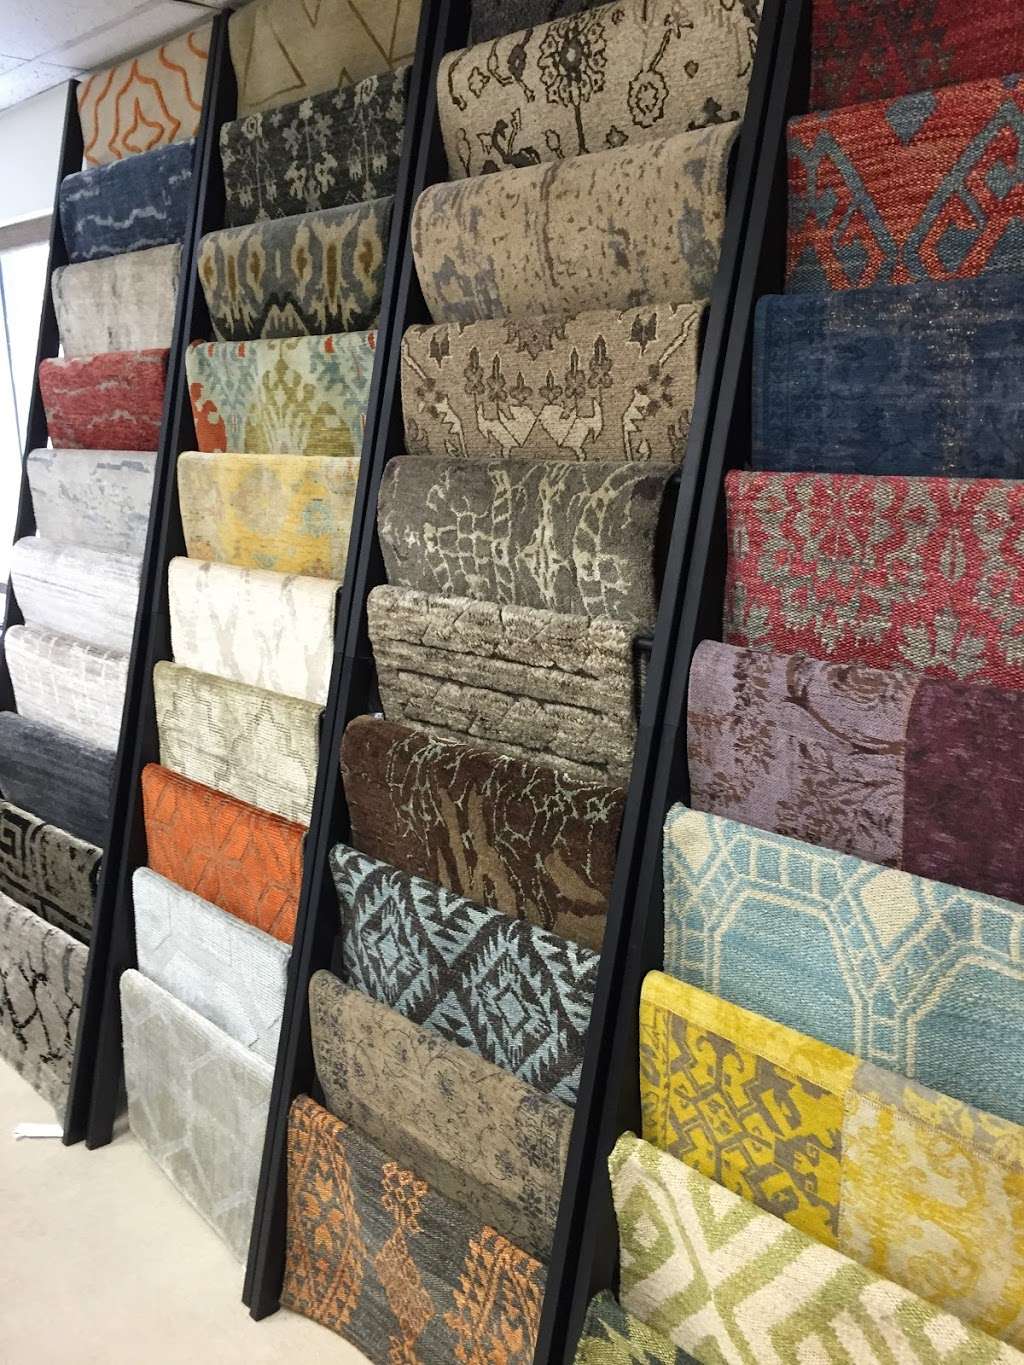 Haute-Textile-Flooring | 1038 Redwood Hwy #5, Mill Valley, CA 94941, USA | Phone: (415) 388-8312